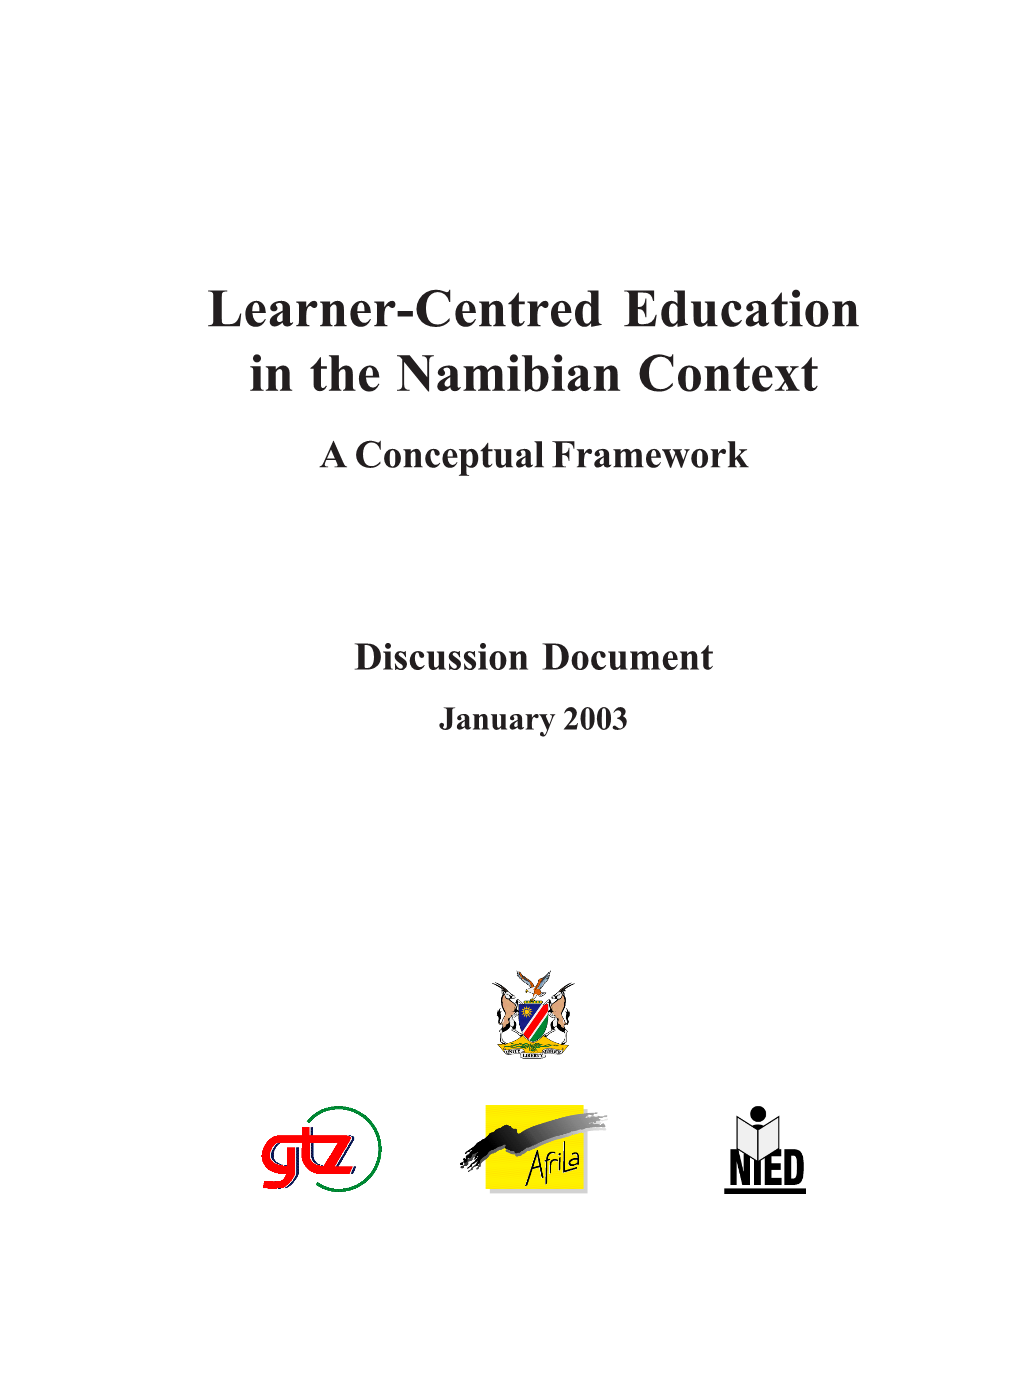 Learner-Centred Education in the Namibian Context a Conceptual Framework